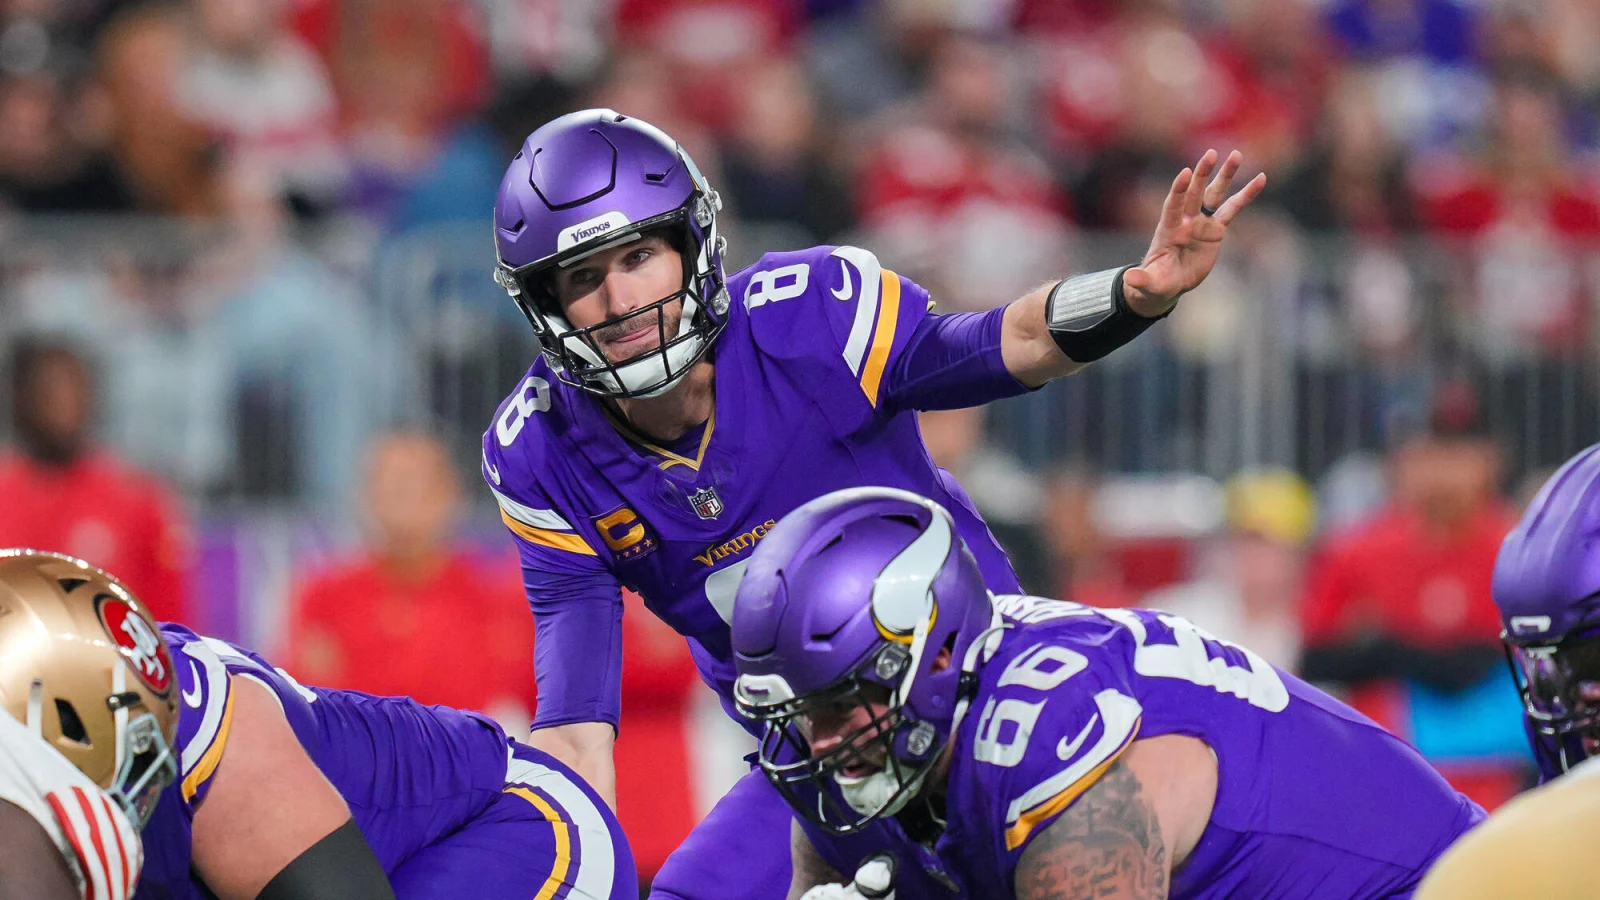 Kirk Cousins and the Minnesota Vikings: A Turning Point in Free Agency